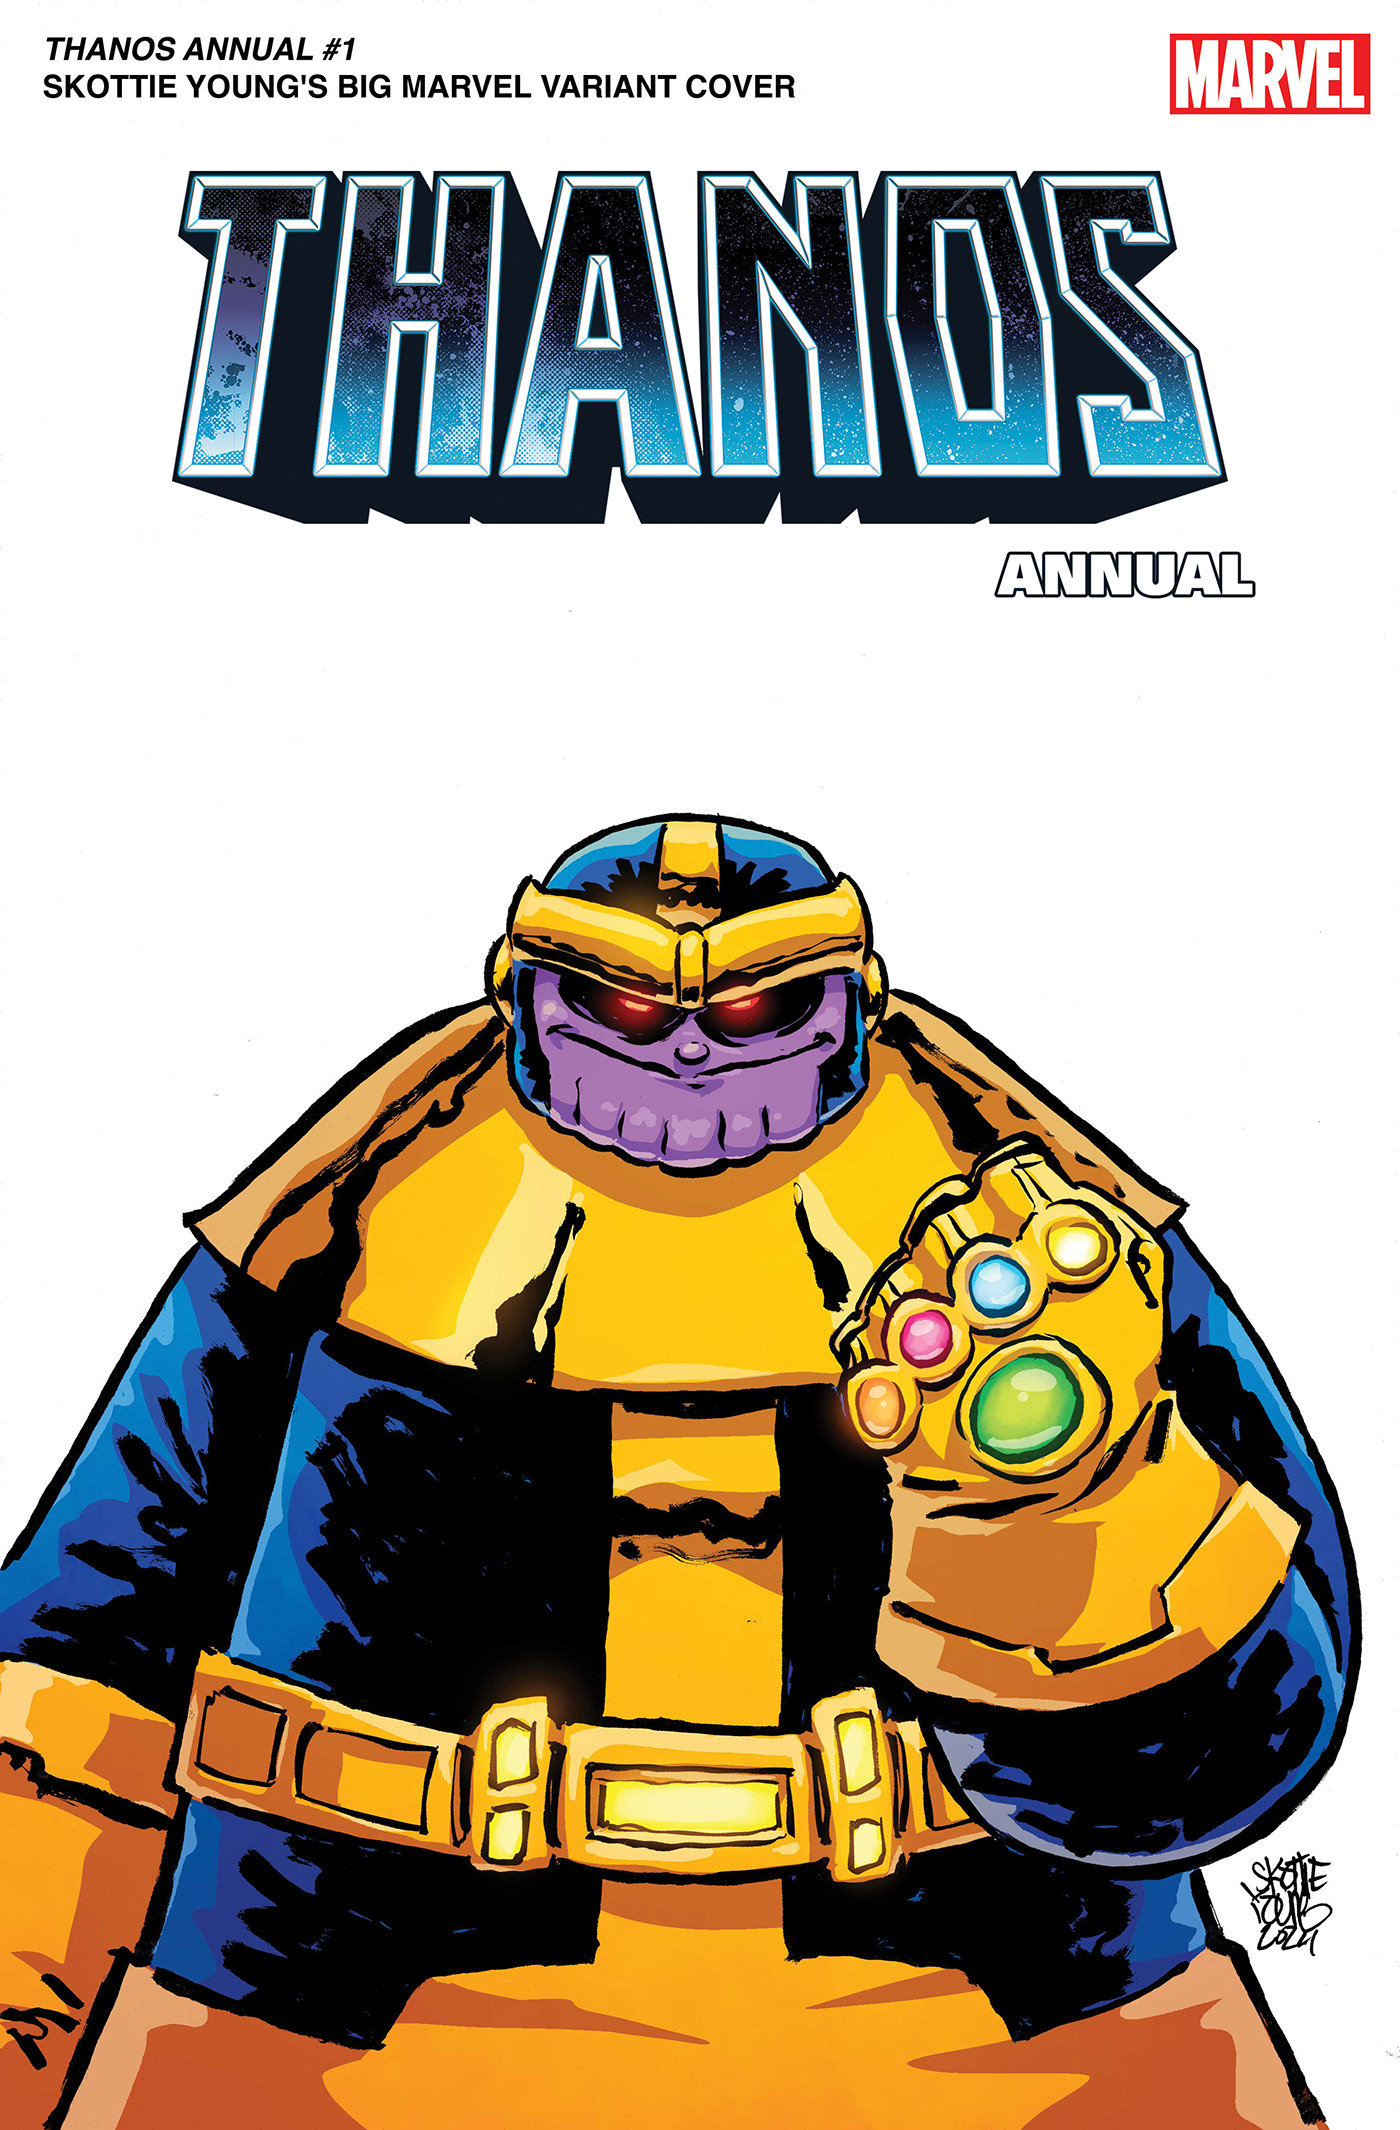 Thanos Annual #1 Skottie Young's Big Marvel Variant (Infinity Watch)